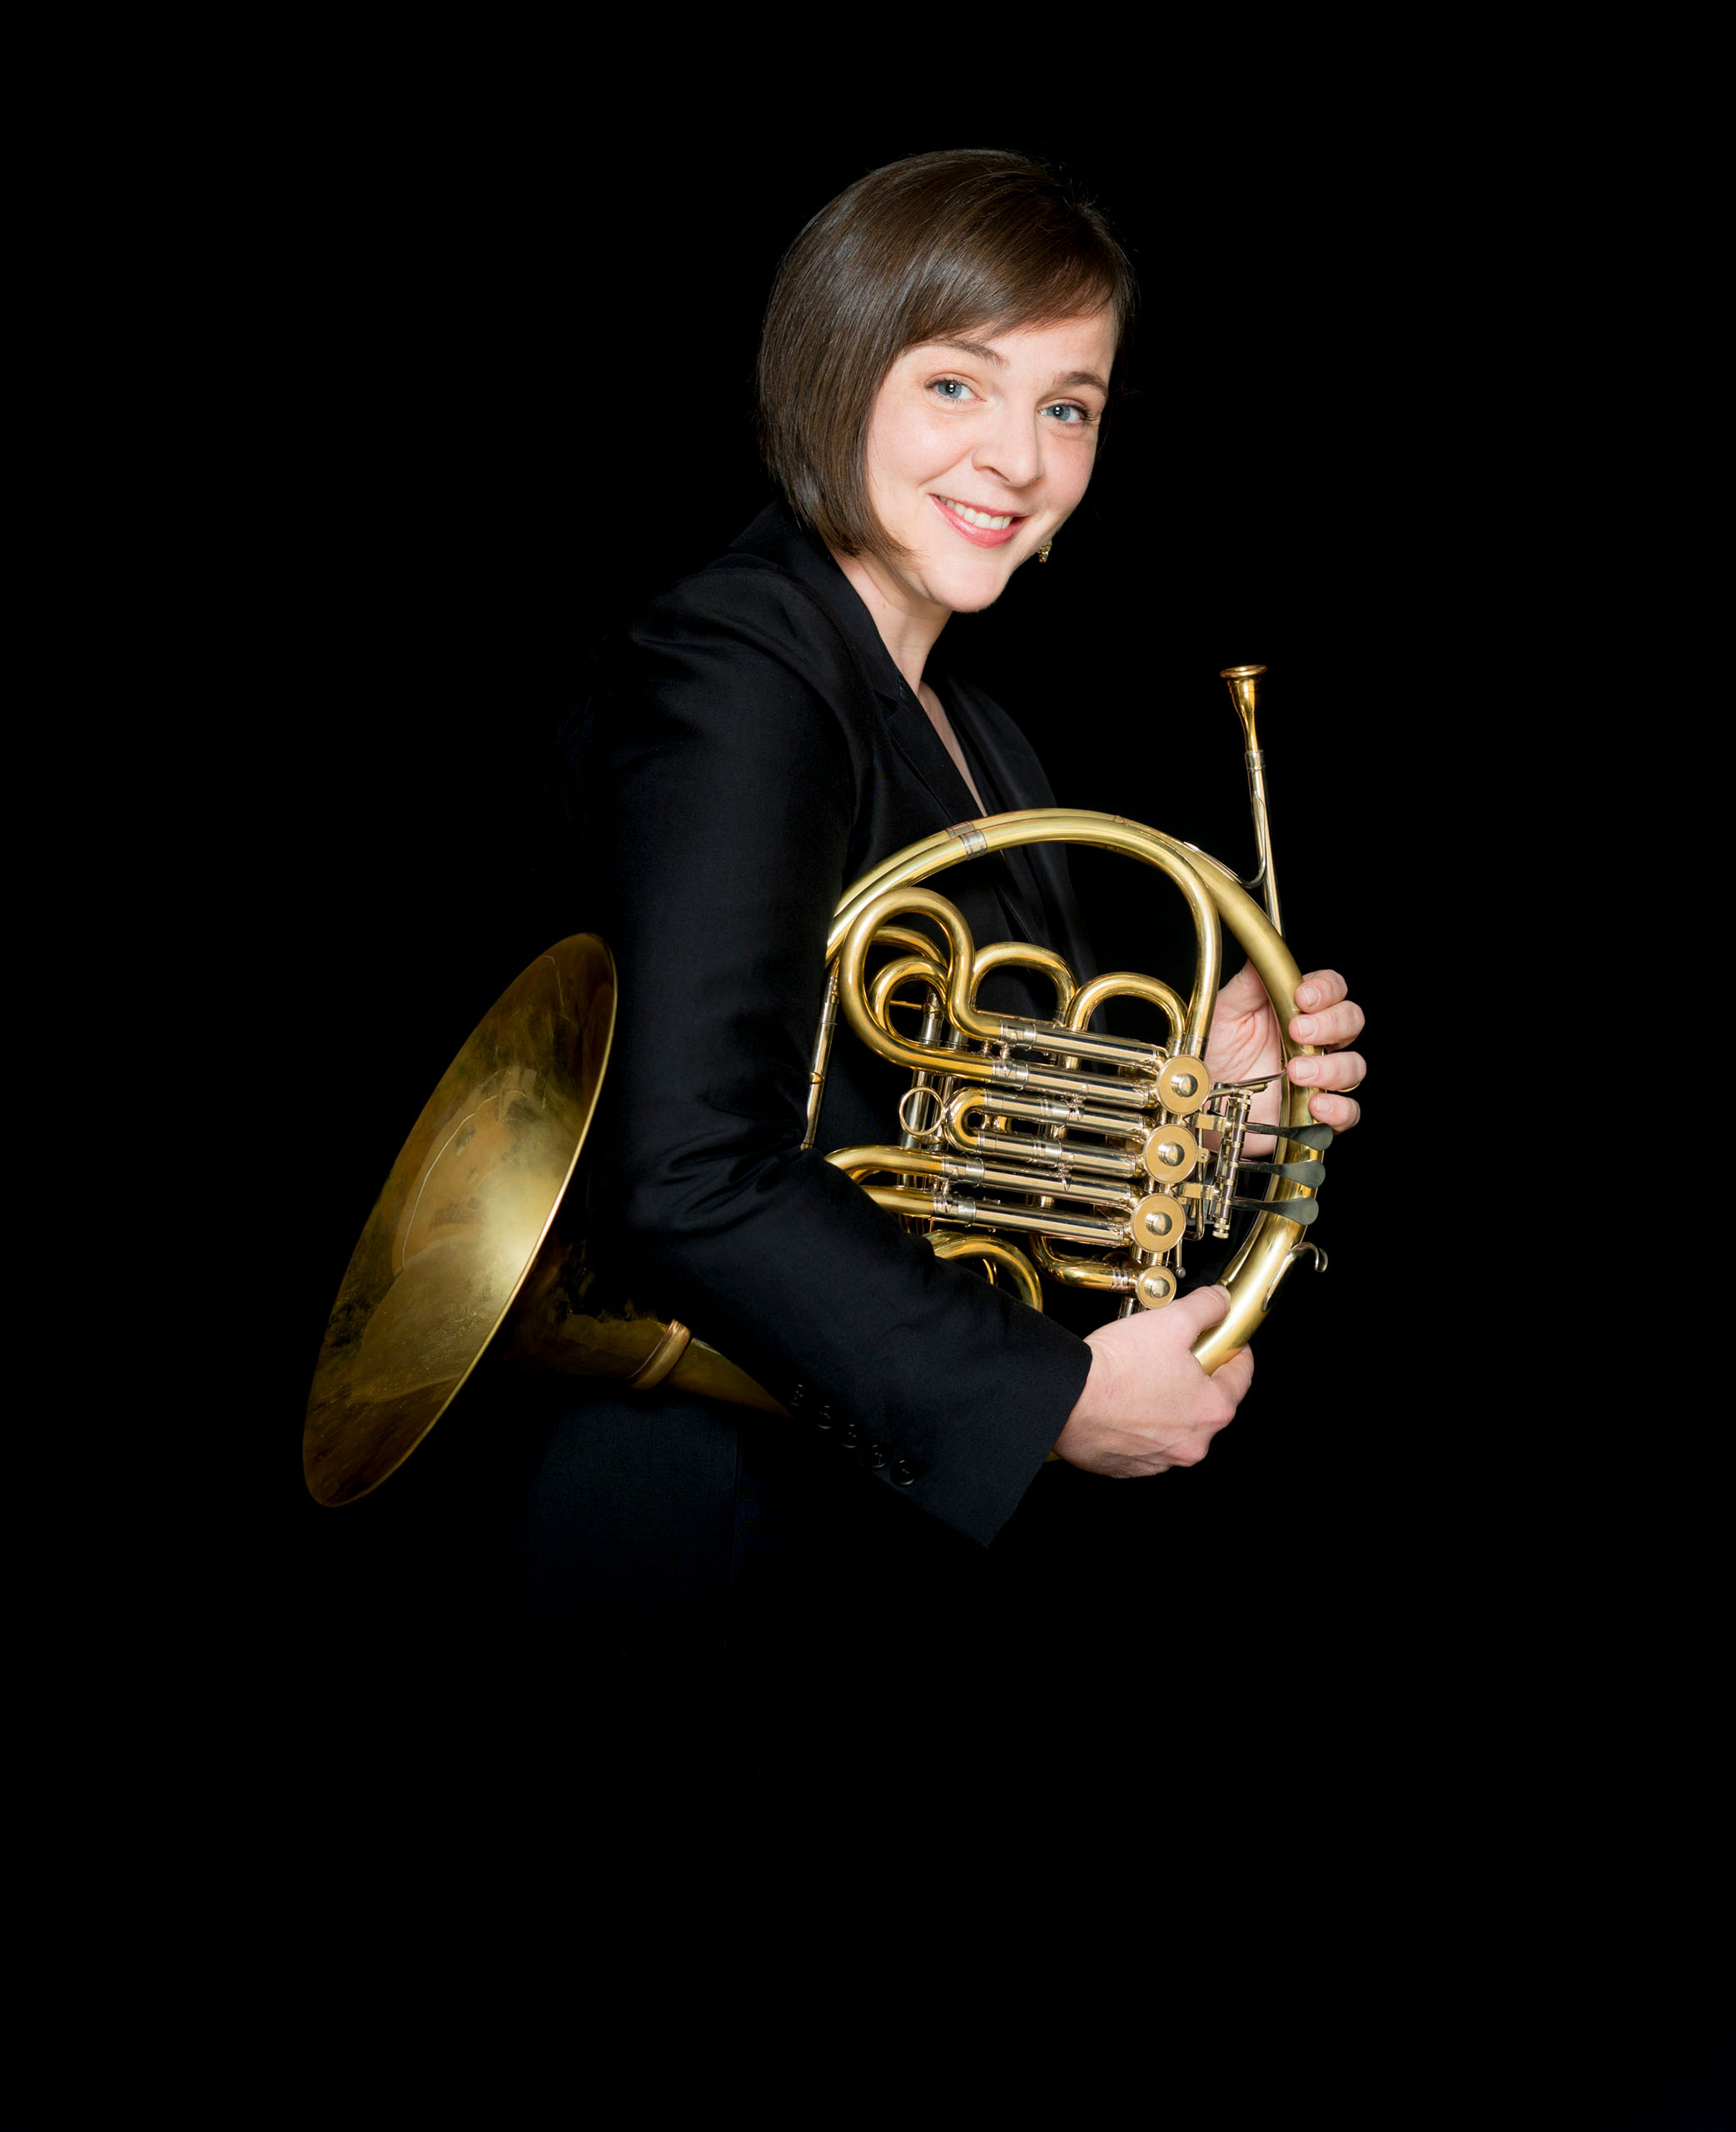 Rachel Childers studio portrait holding her French horn, wearing black with dramatic black background